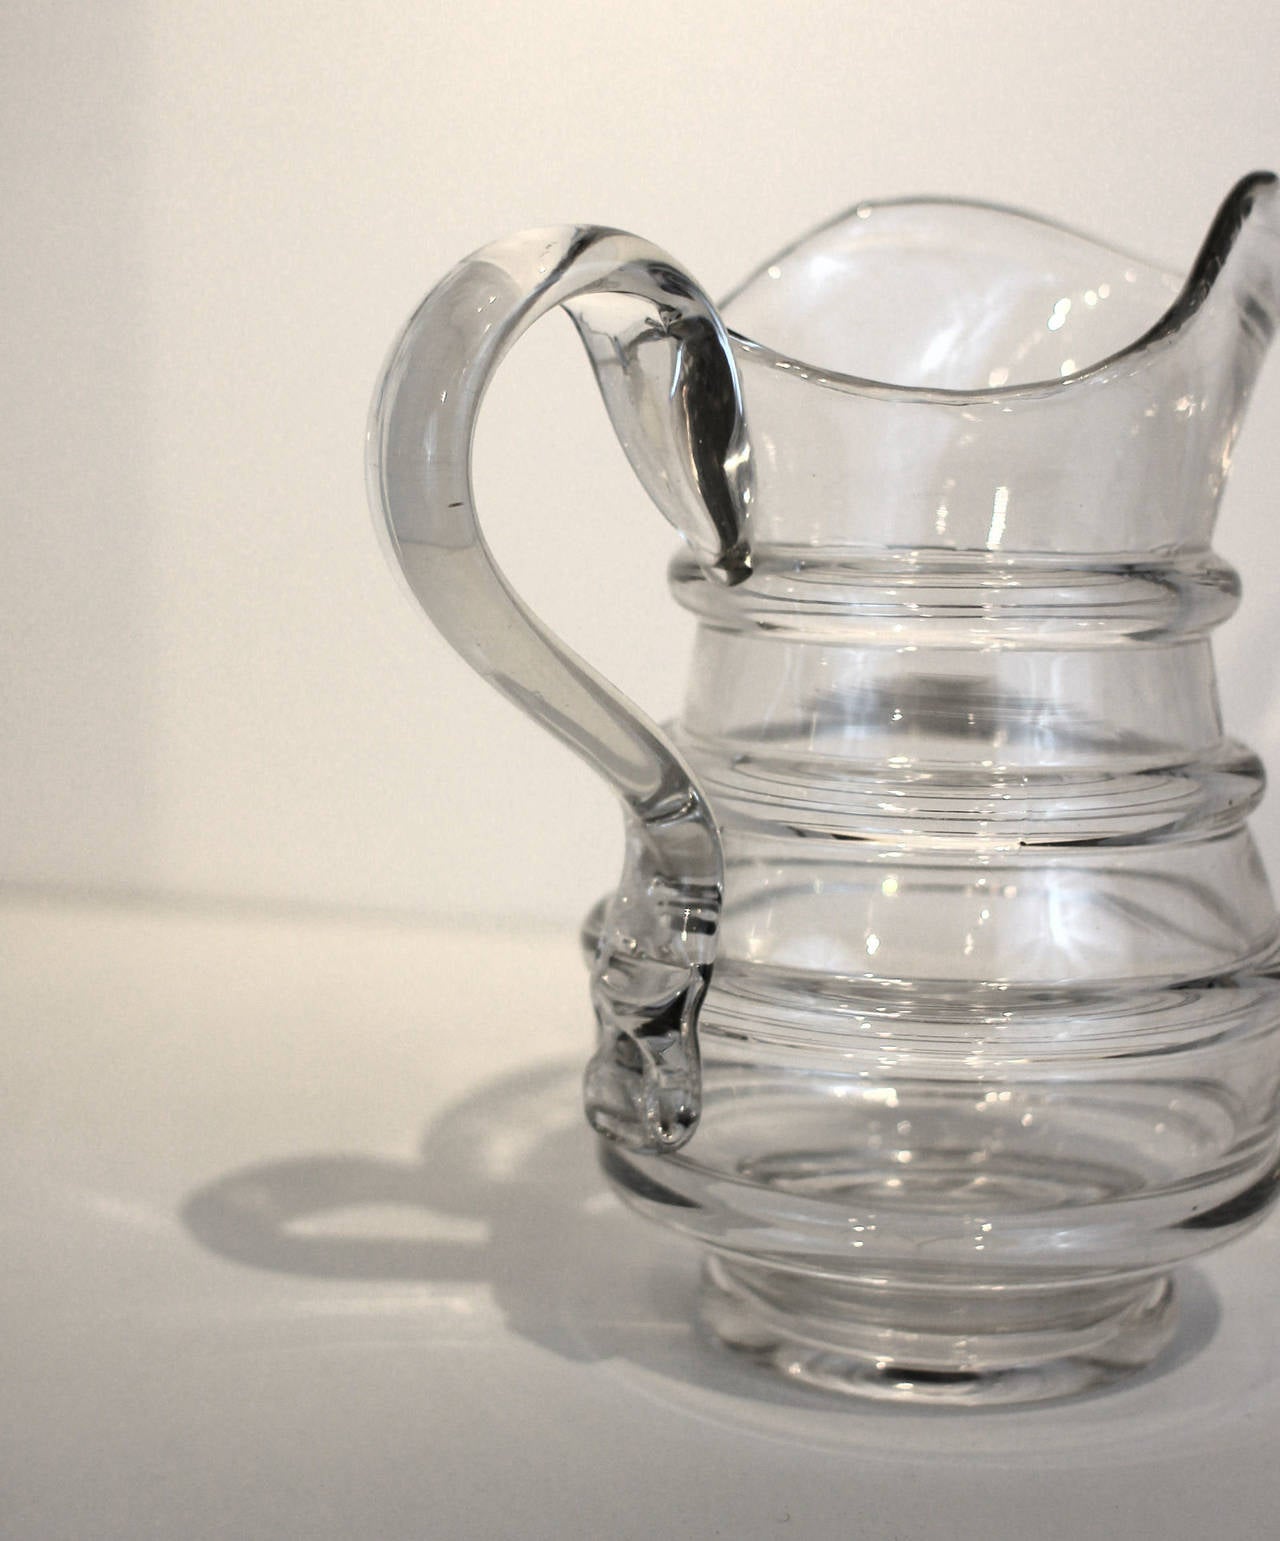 Federal American Blown Glass Pitcher, Mid-19th Century